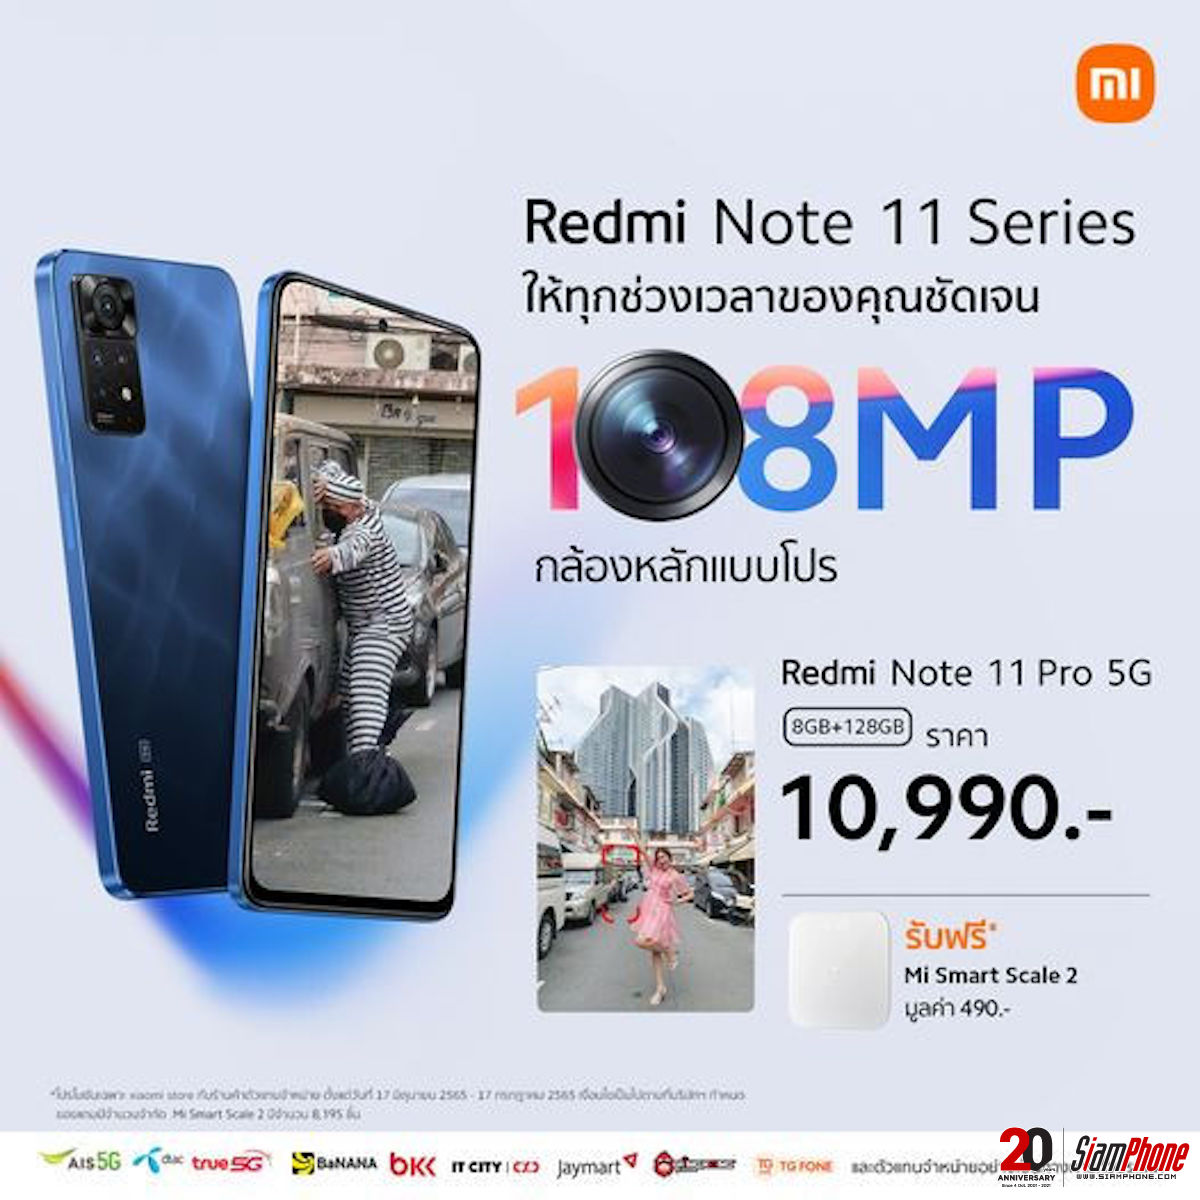 Enjoy taking pictures with a 108MP camera with the Redmi Note 11 Series and receive special promotions.